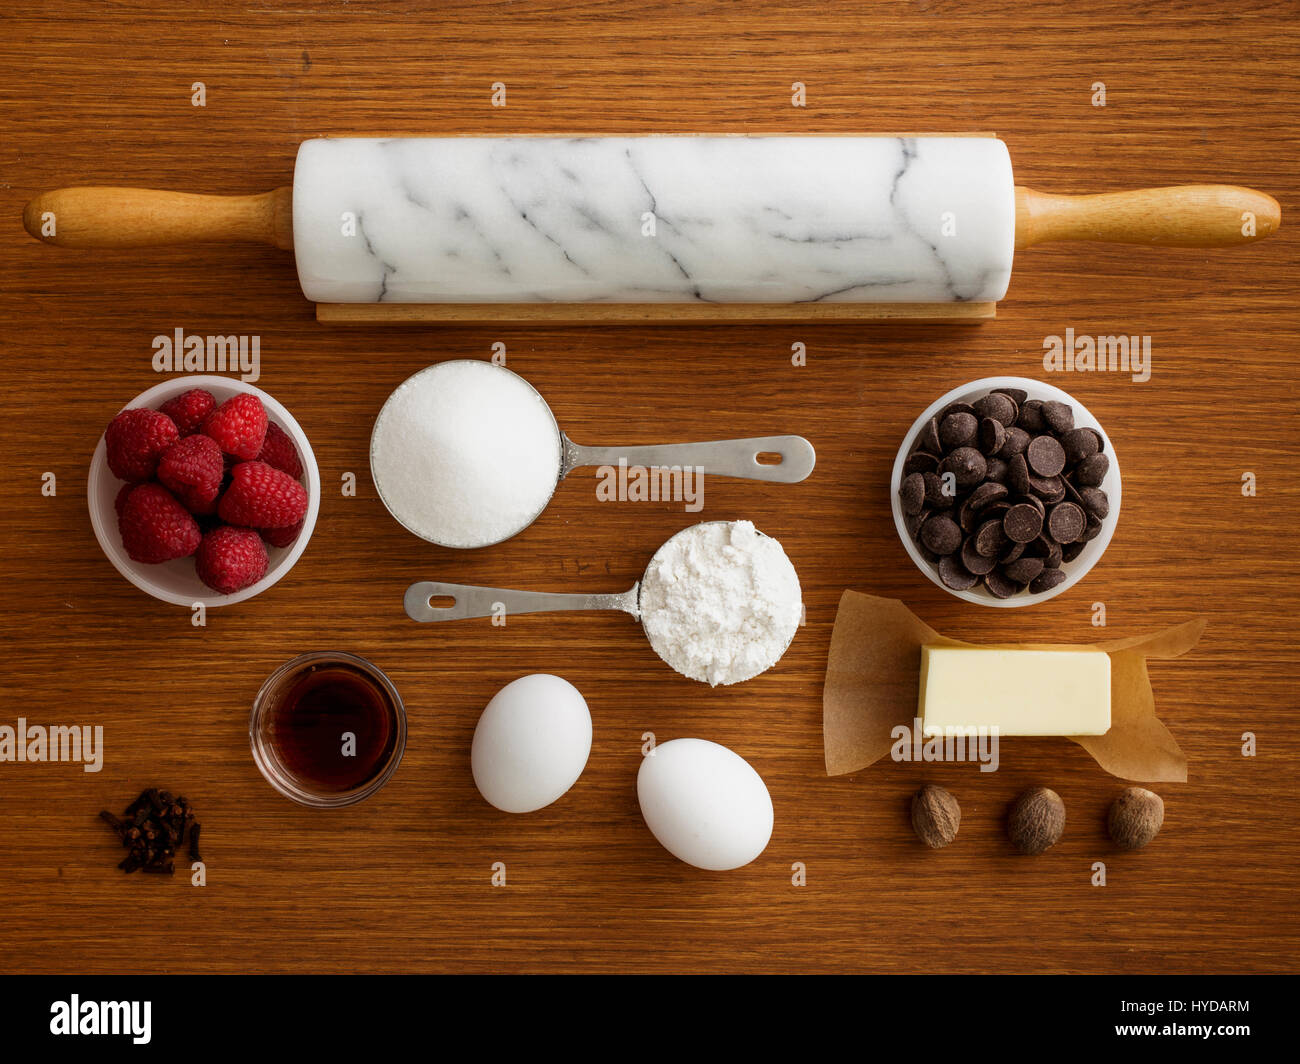 Studio shot of wooden table with rolling pin and fresh ingredients Stock Photo